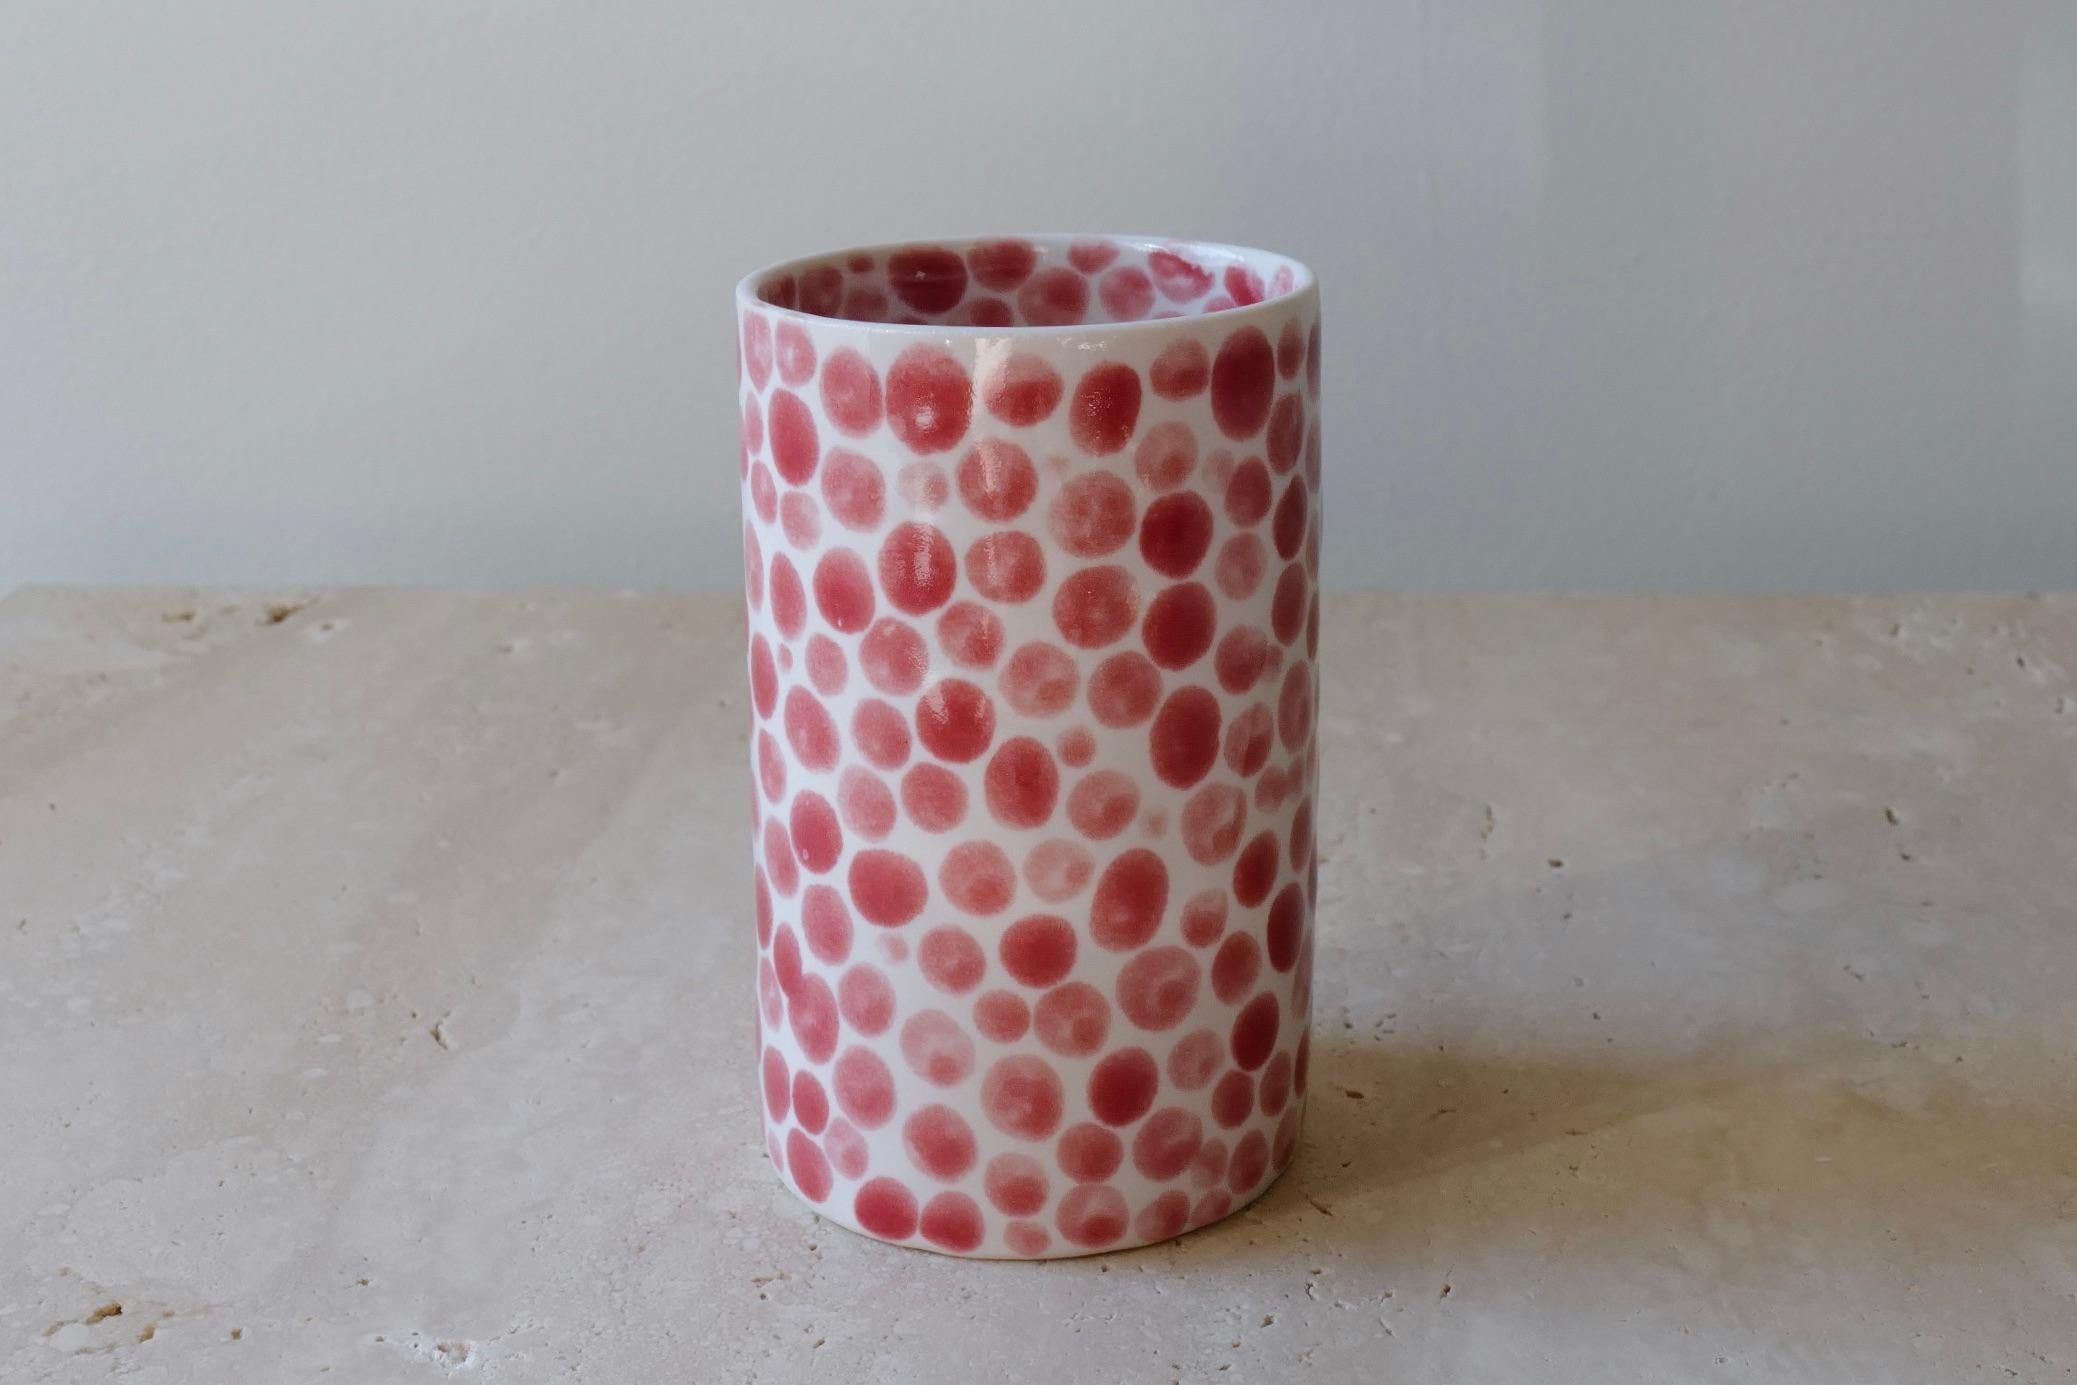 Ceramic drinking cup. Hand-cast in porcelain and once bisque fired, each dot is hand-painted with a shiny red glaze. An unconventional layered glazing technique, developed by the artist, is used in these cast porcelain pieces. The straight walls and